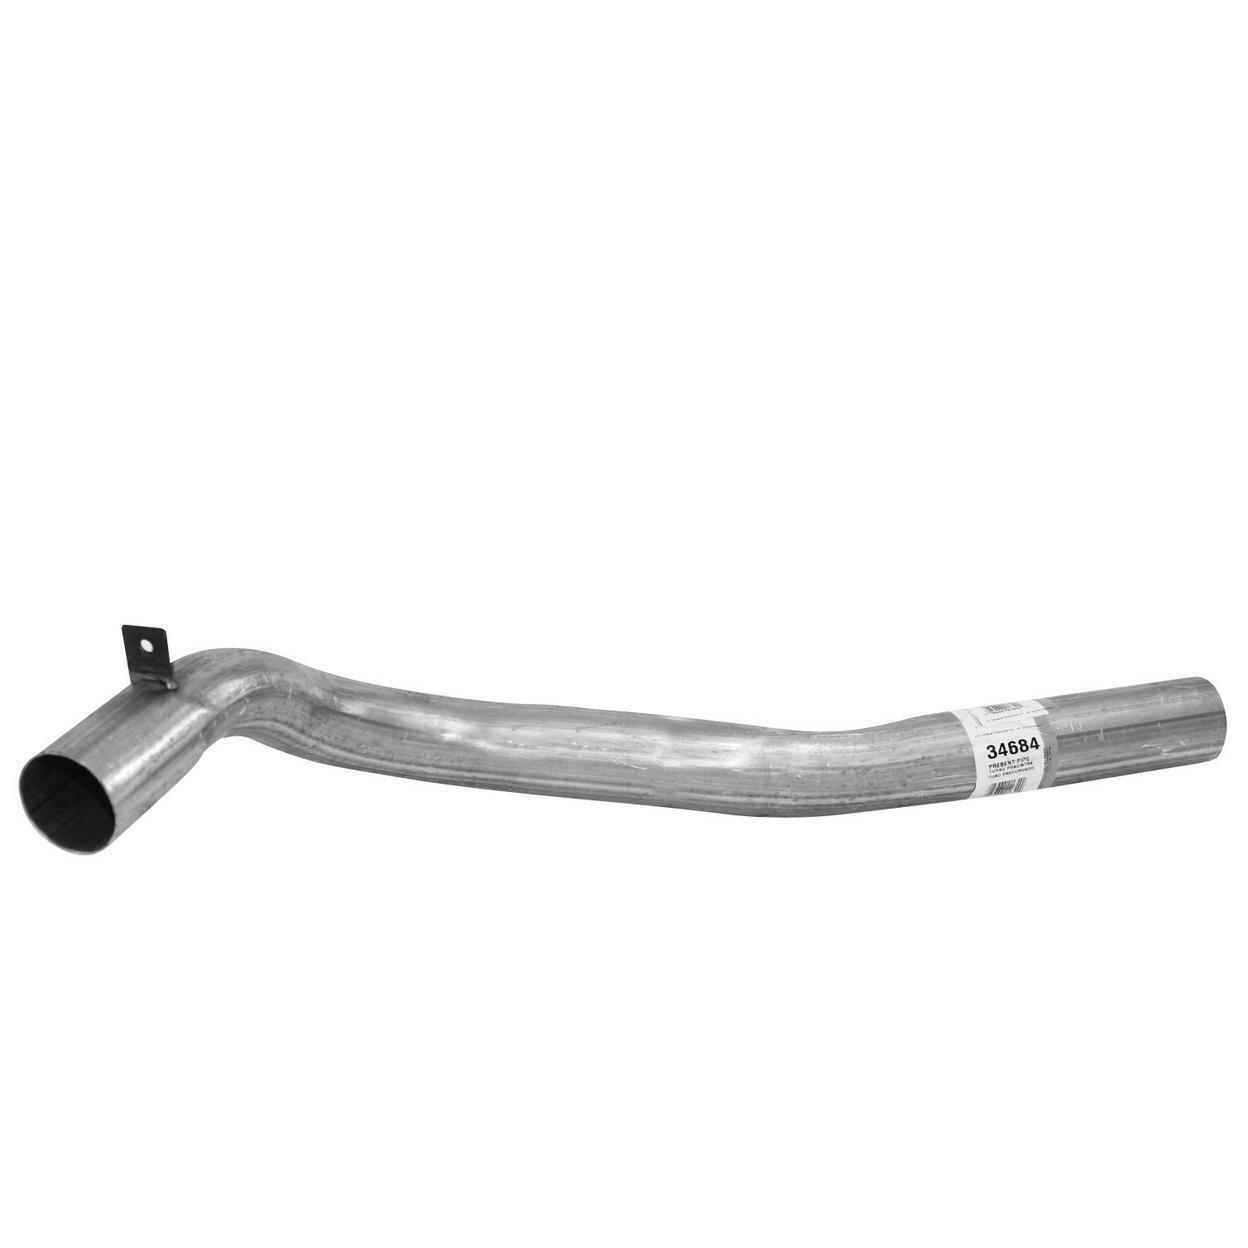 34684-OH Exhaust Tail Pipe Fits 1986-1987 Oldsmobile Cutlass Supreme 5.0L V8 GAS